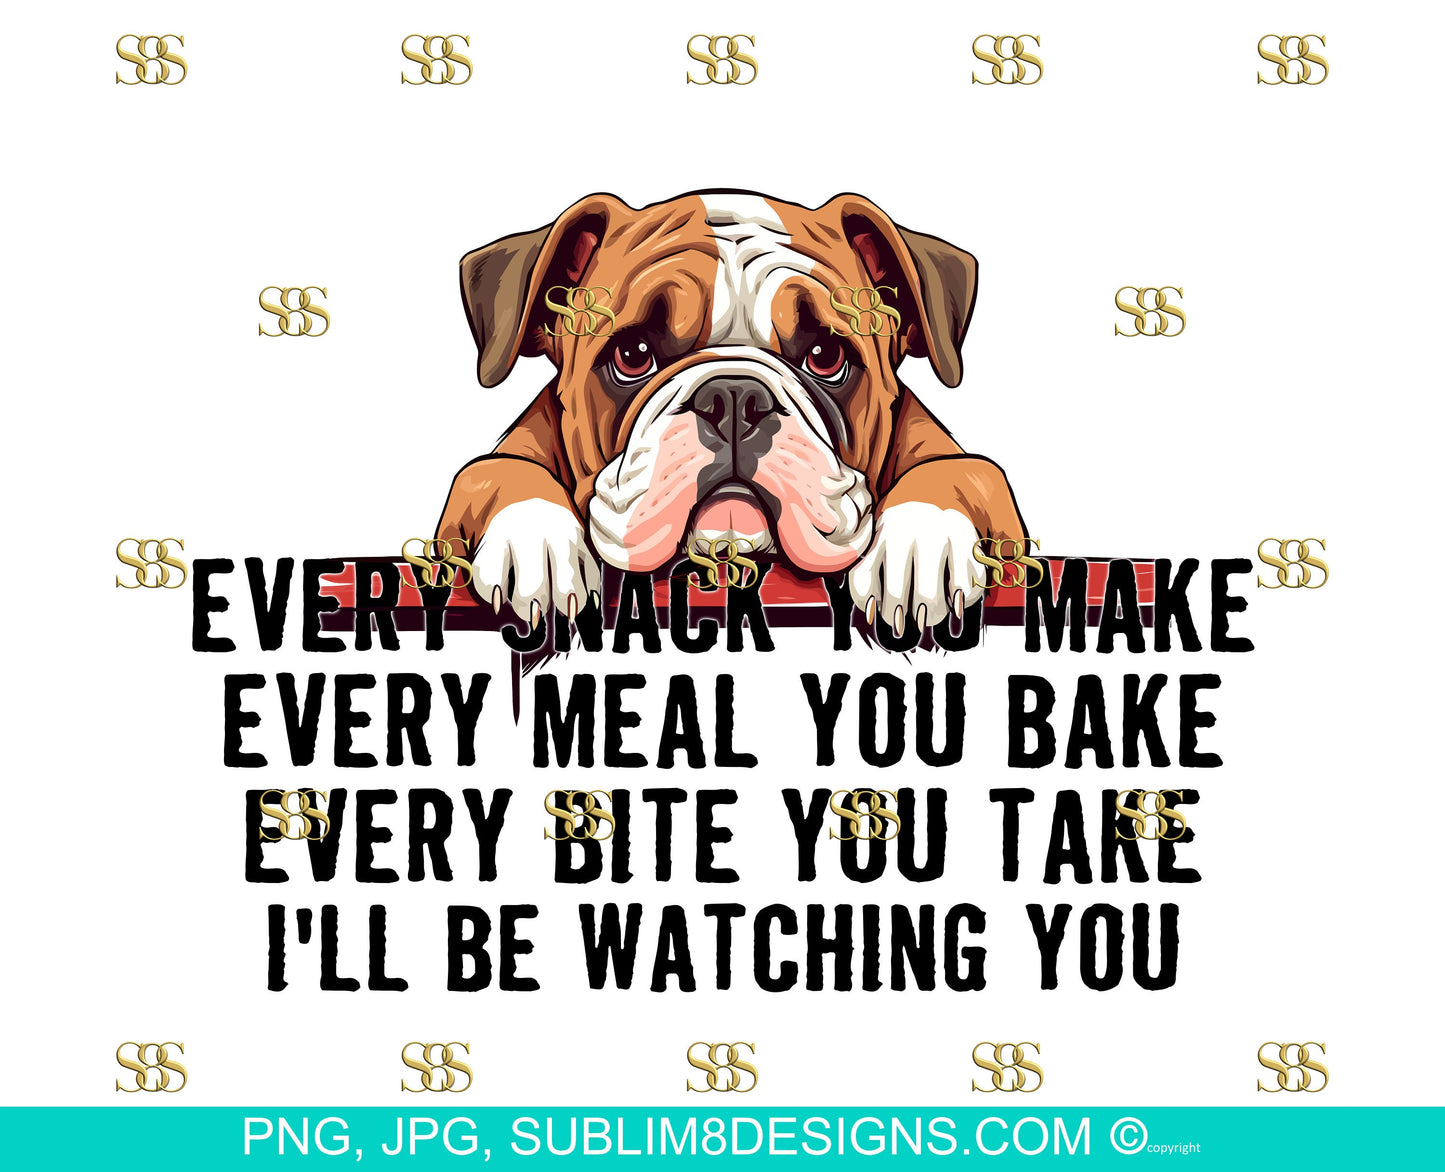 Snack-Obsessed Bulldog: The Hilarious Table Peeker! Every Bite You Take I'll Be Watching You PNG and JPEG ONLY